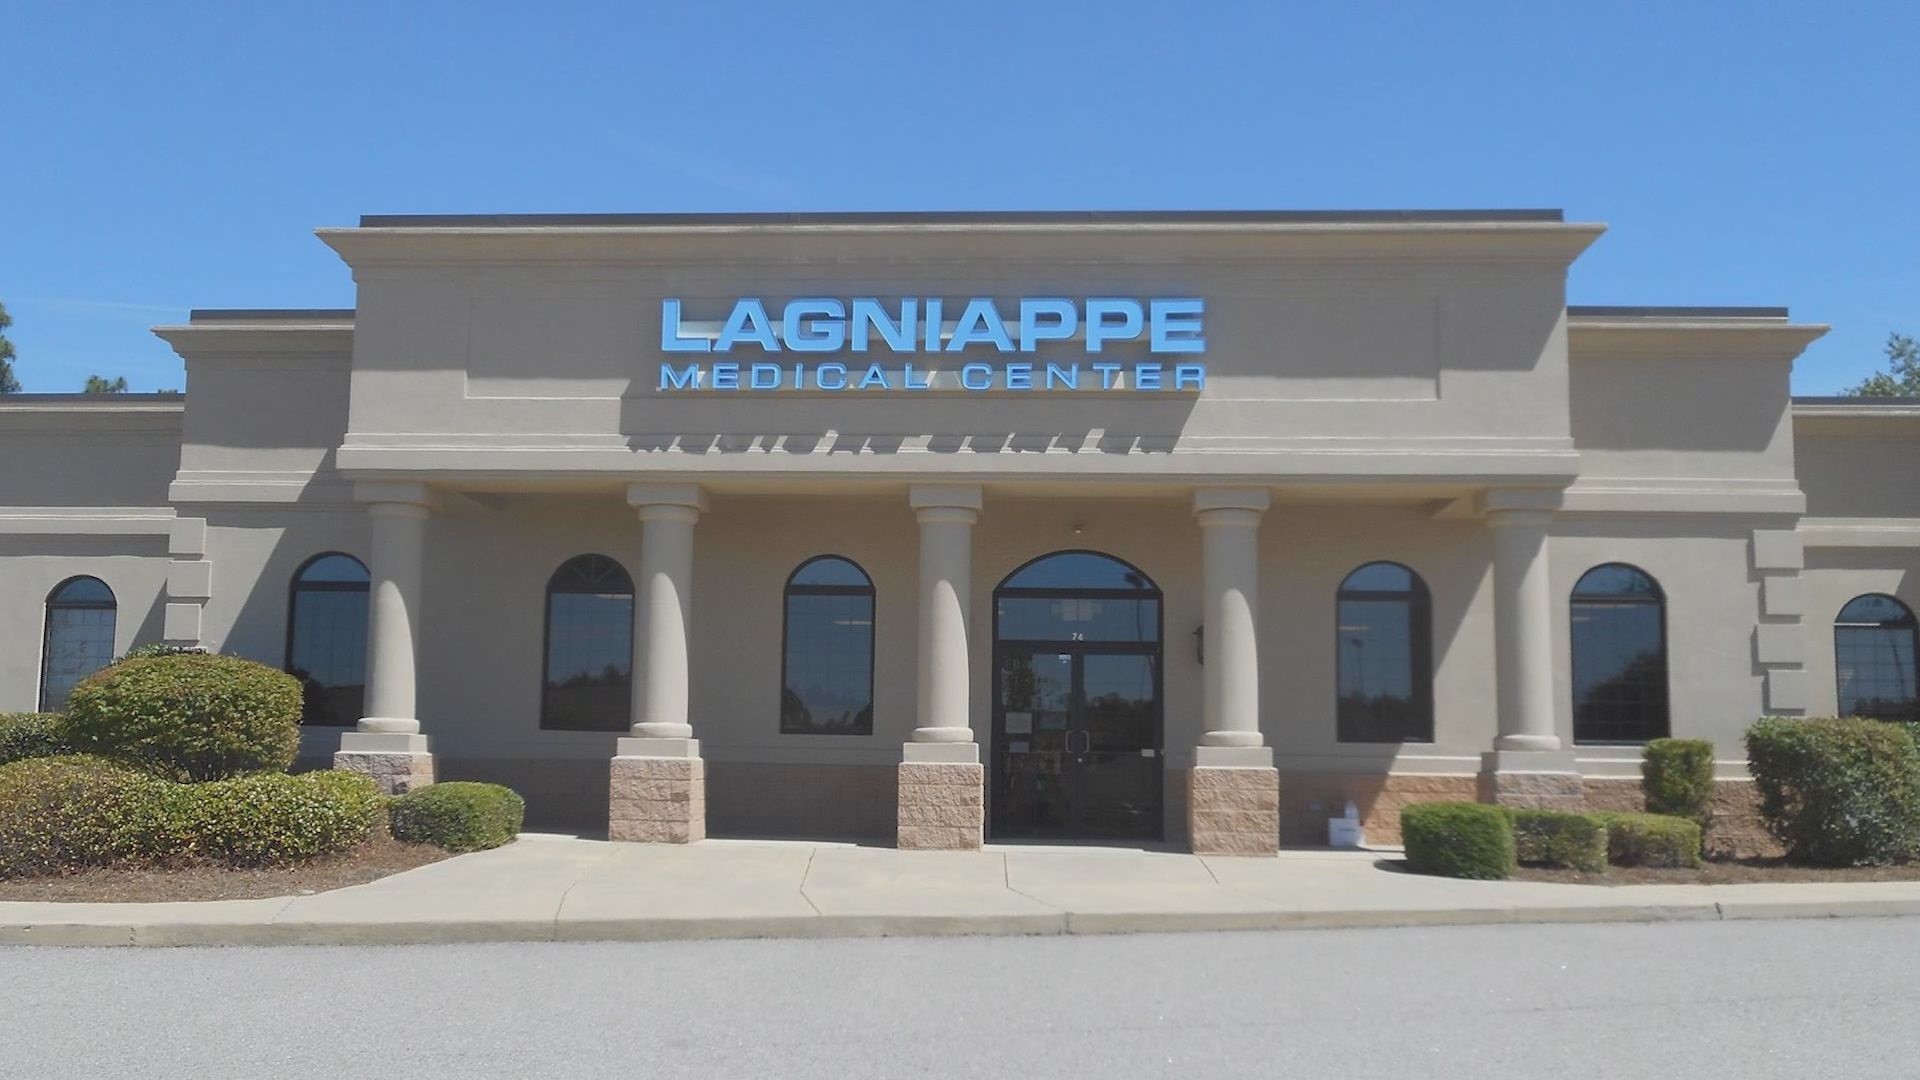 Lagniappe Medical Center is a primary care clinic and urgent care center serving families and individuals of all ages in the Columbia, South Carolina, area. With two locations in Columbia, one in West Columbia, and a fourth in Blythewood, patients can easily access the dedicated and personalized care of the Lagniappe Medical Center team.